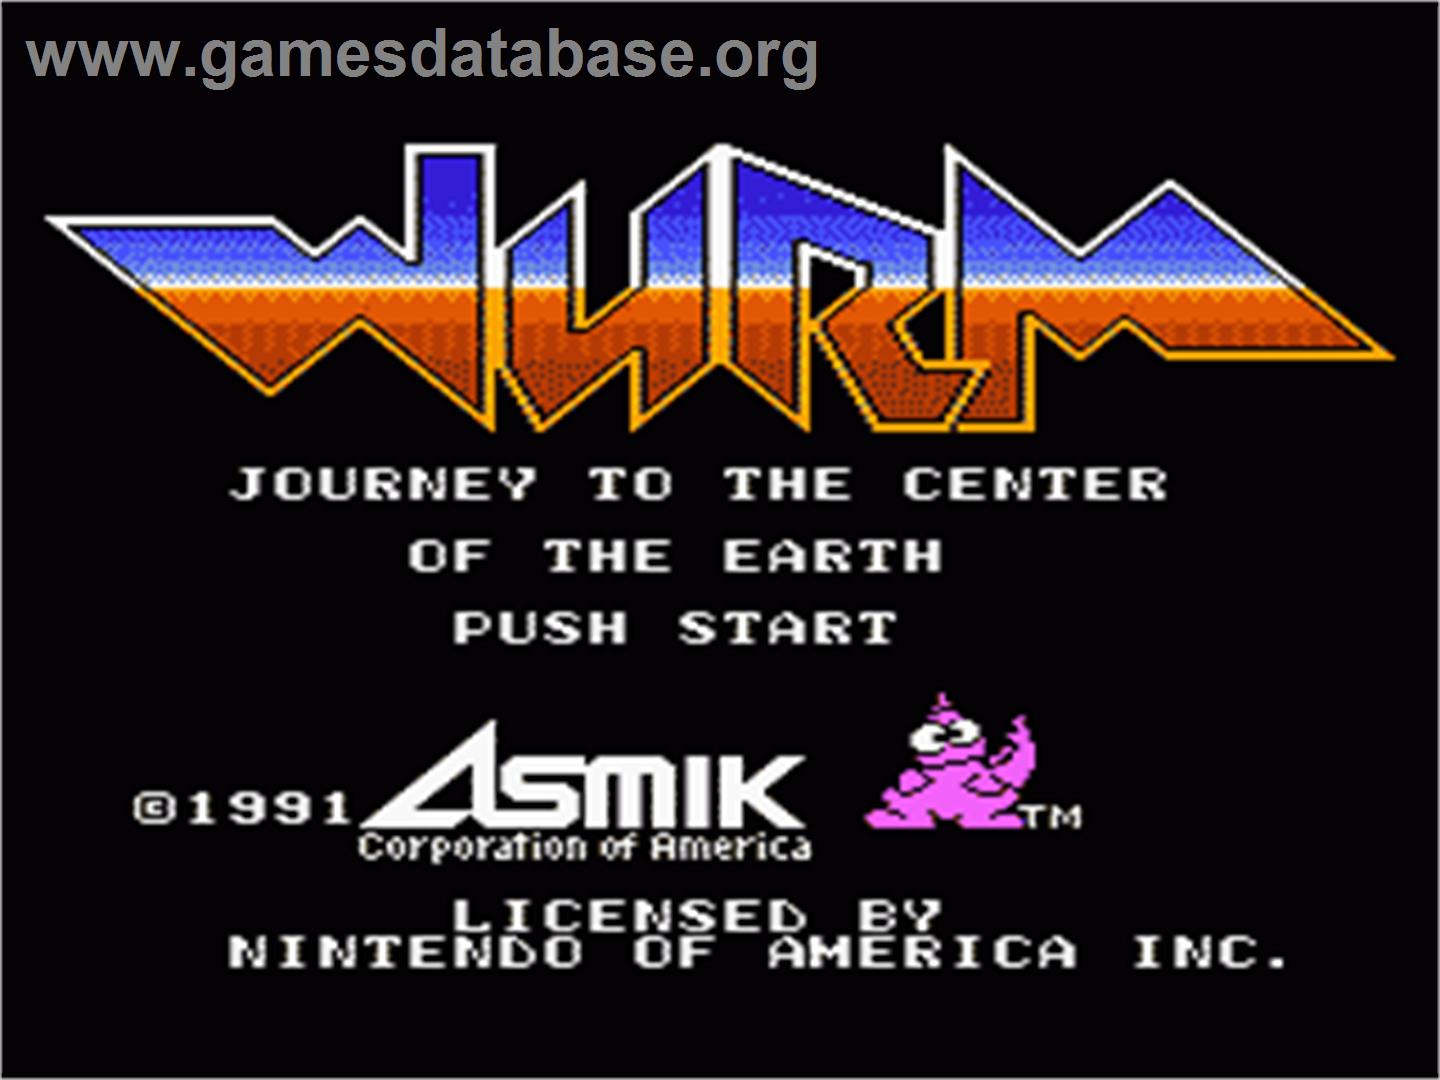 Wurm: Journey to the Center of the Earth - Nintendo NES - Artwork - Title Screen